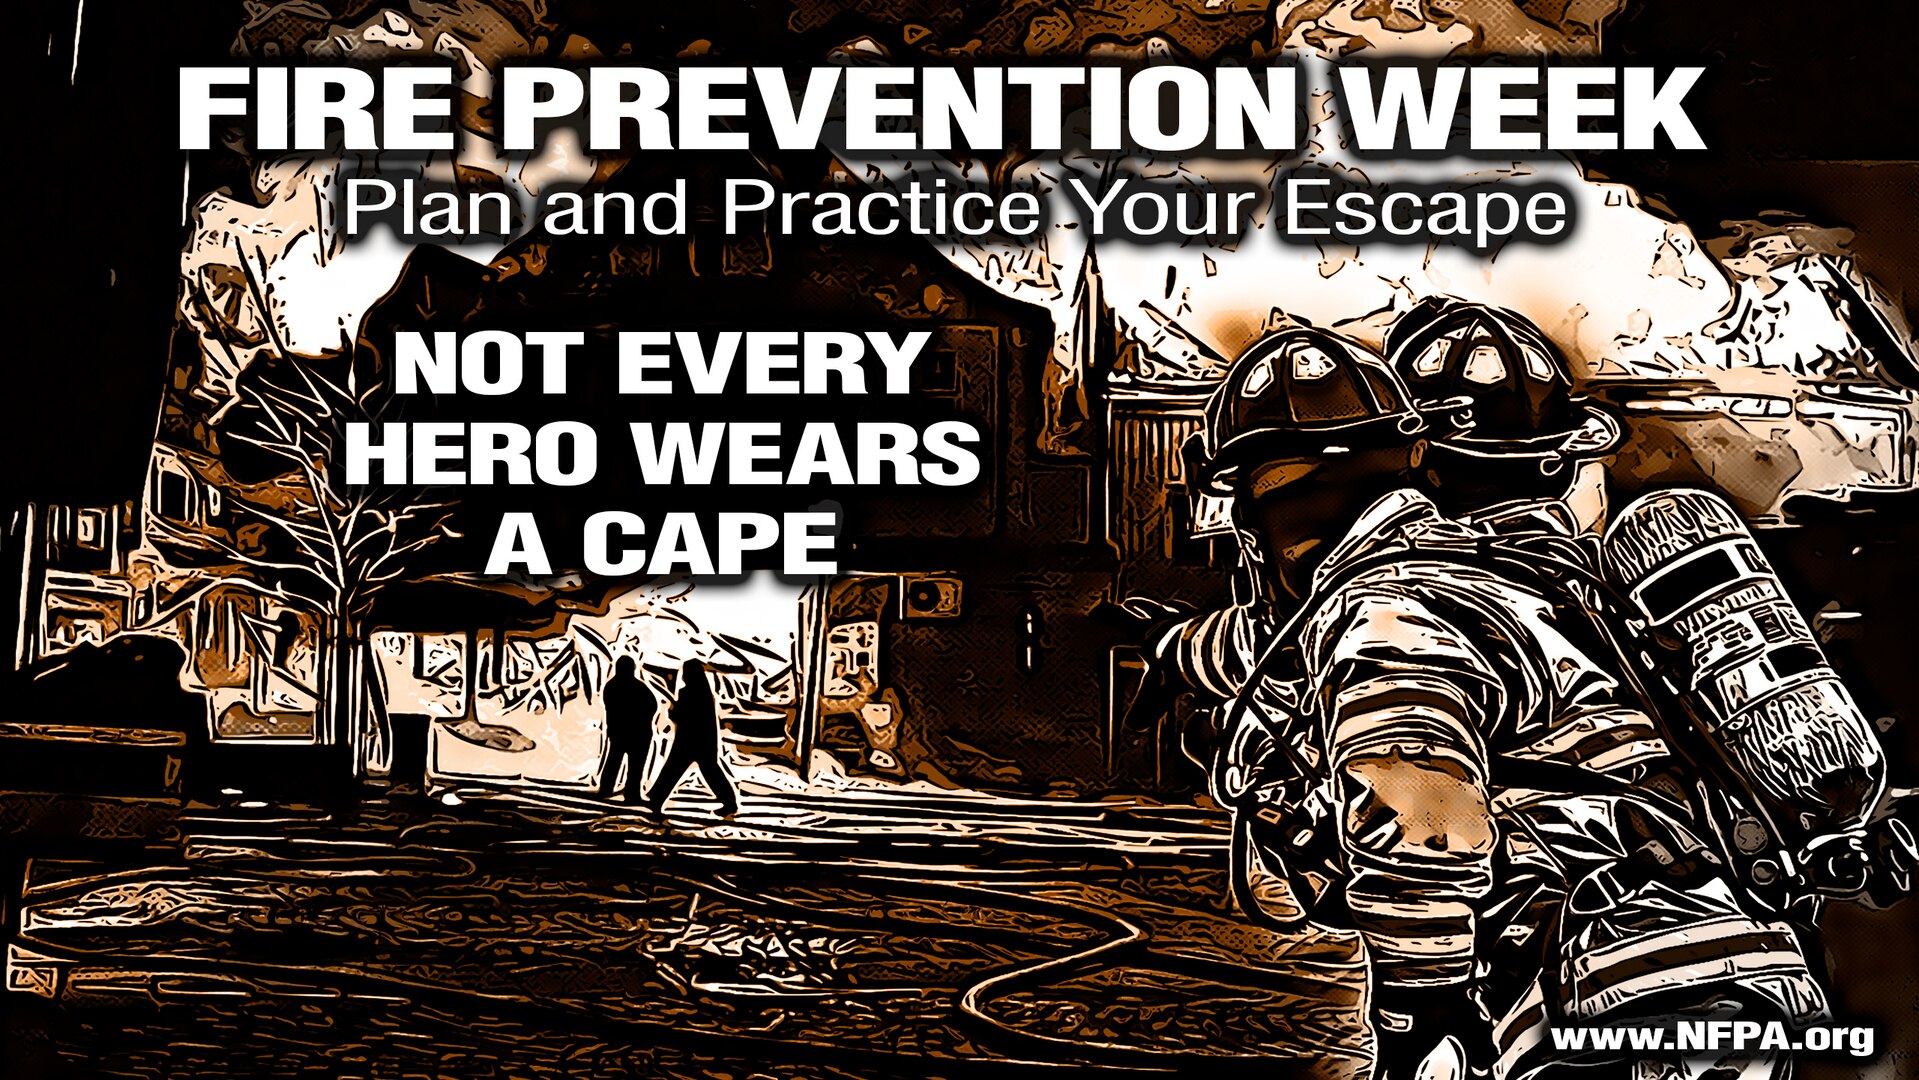 Fire Prevention Week, Oct. 6-12, is a reminder to review fire safety plans at home and work. This year’s theme, “Not every hero wears a cape,” highlights the small but important actions everyone can take to remain safe.